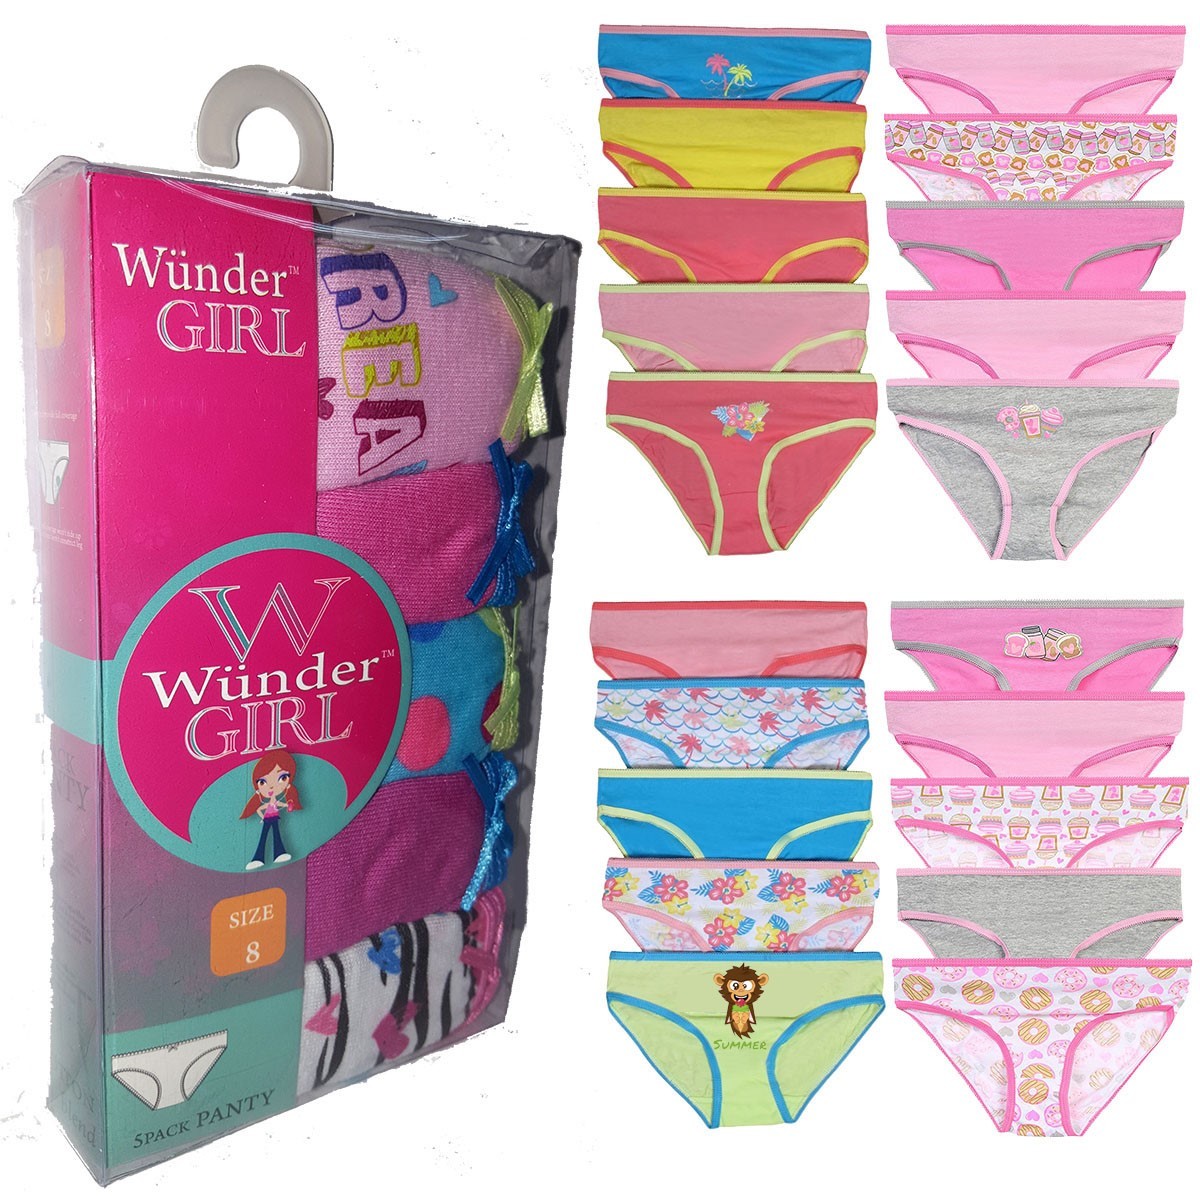 Girls' Cotton Panties - Assorted Print, 5 Pack, Size 4-14